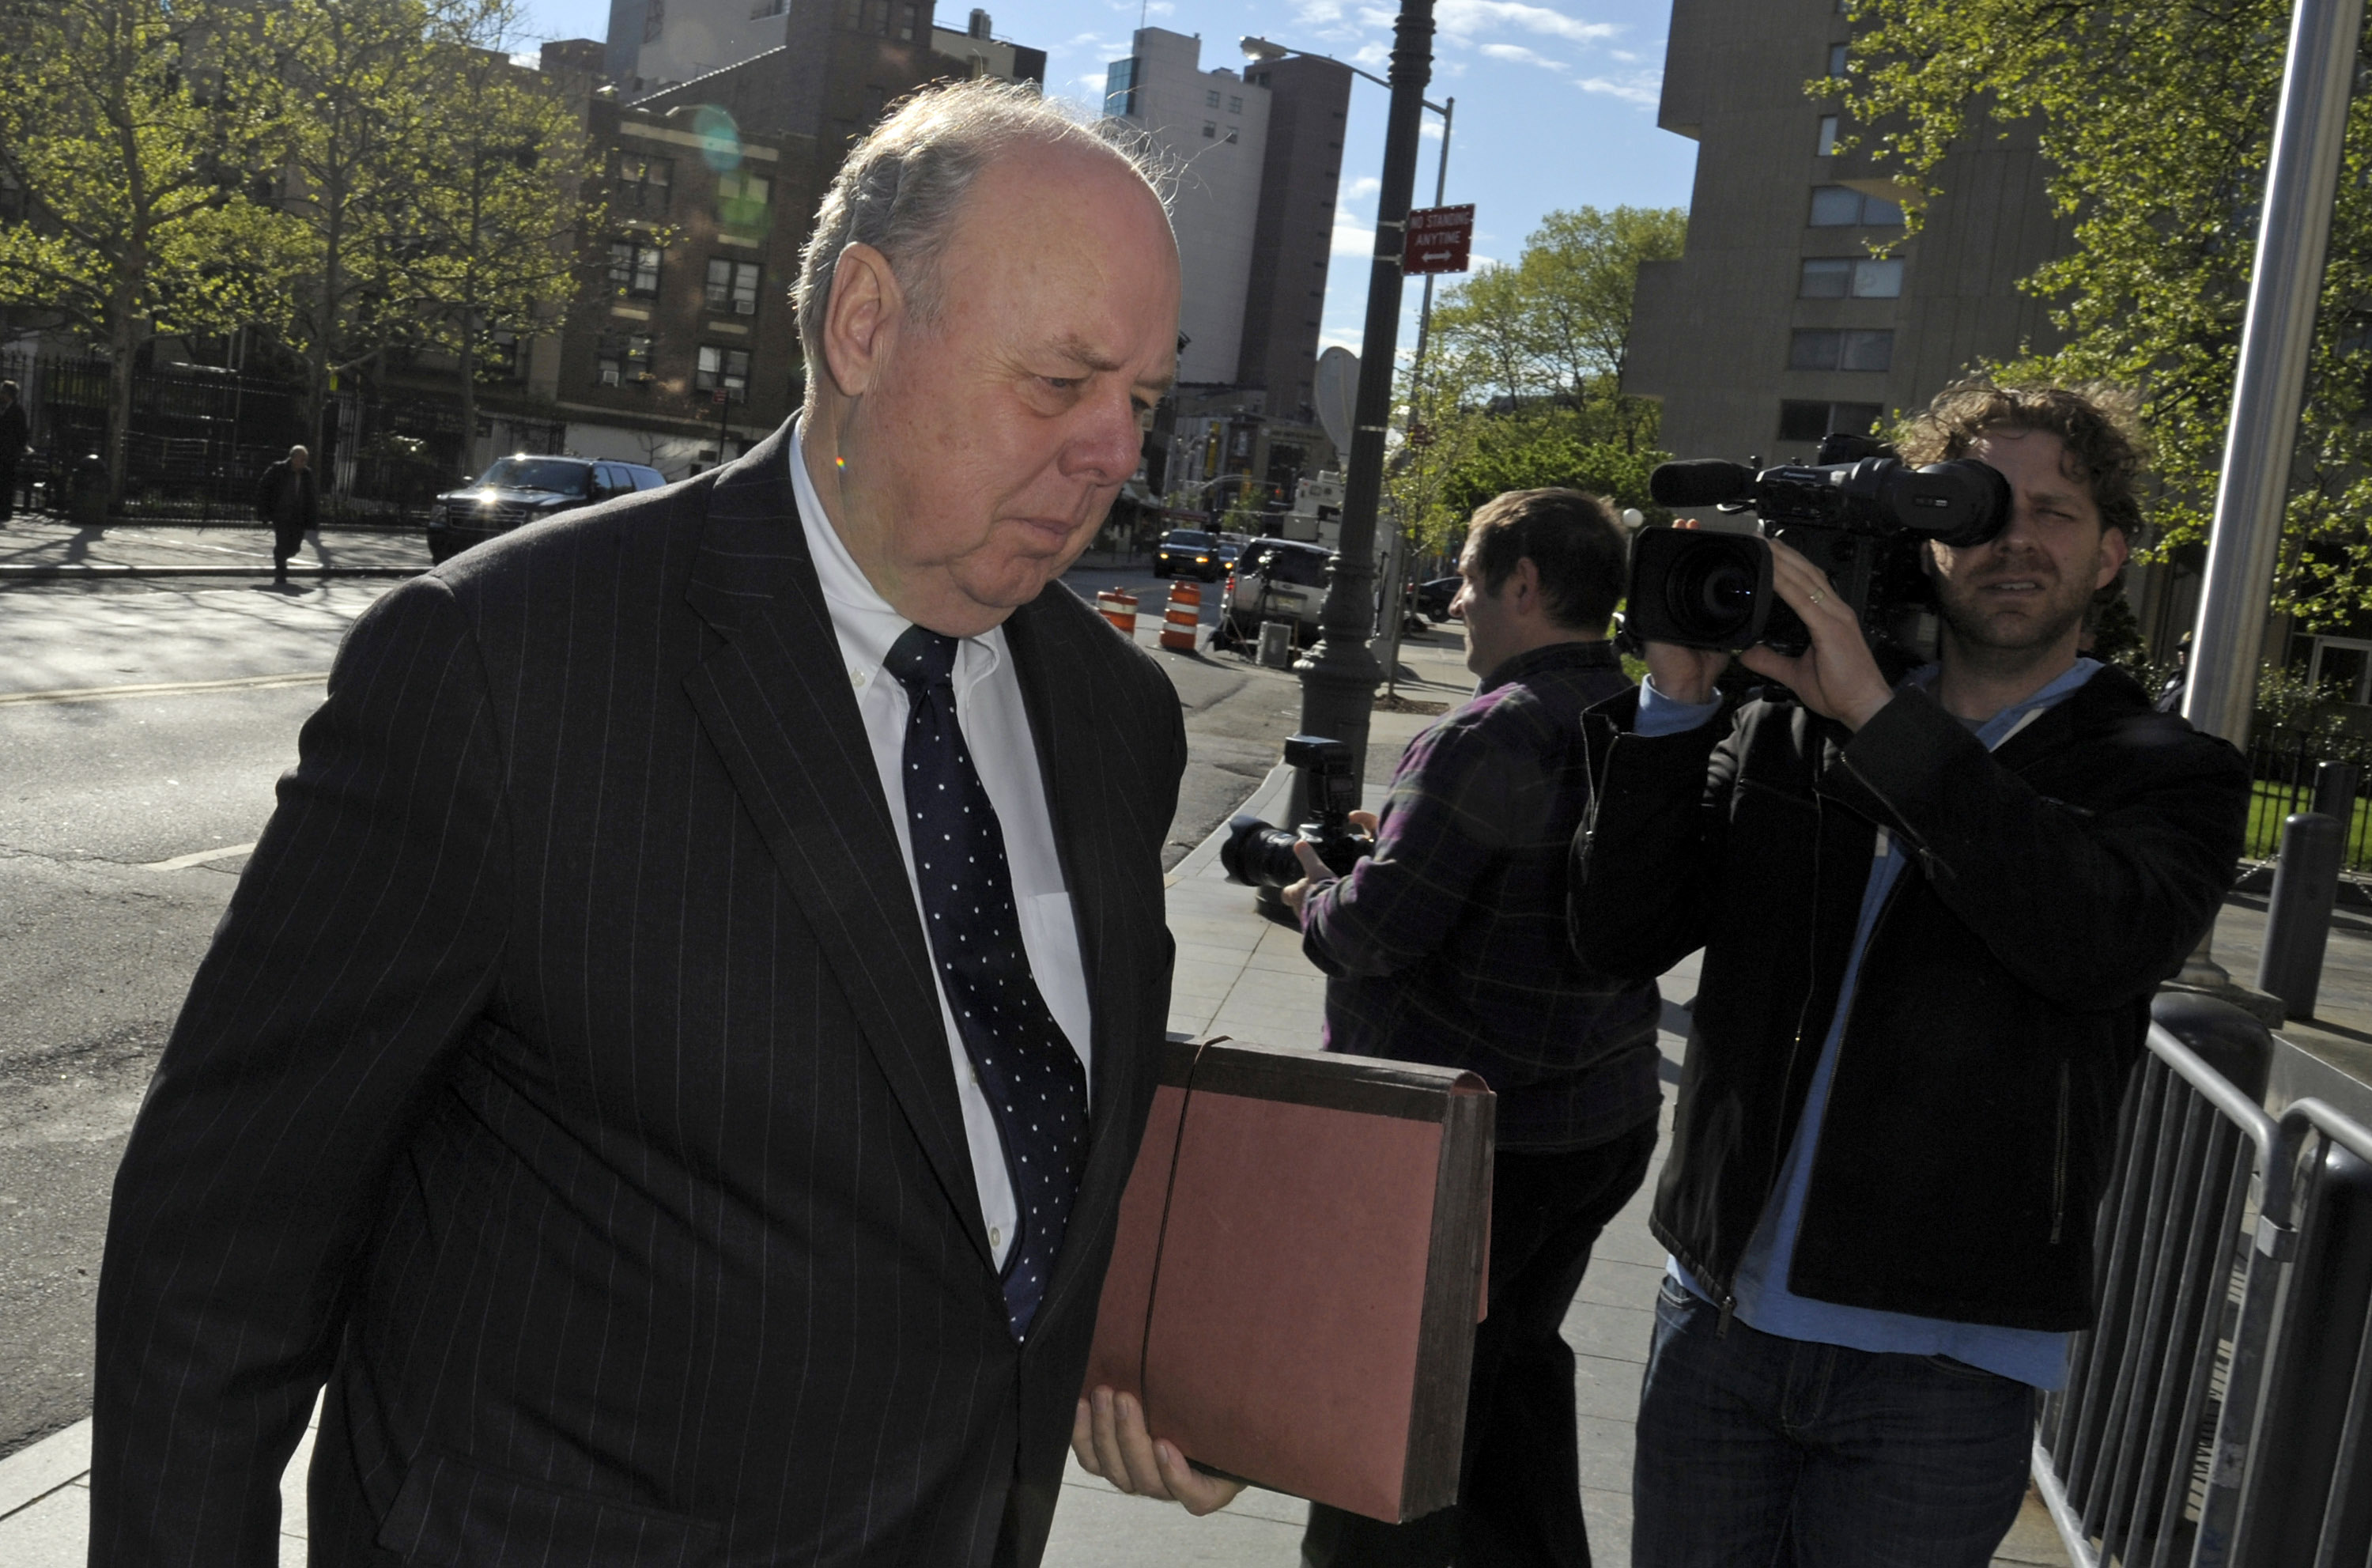 John Dowd, lead attorney for Raj Rajaratnam, co-founder of Galleon Group LLC, enters federal court  in New York, U.S., on Thursday, May 5, 2011.